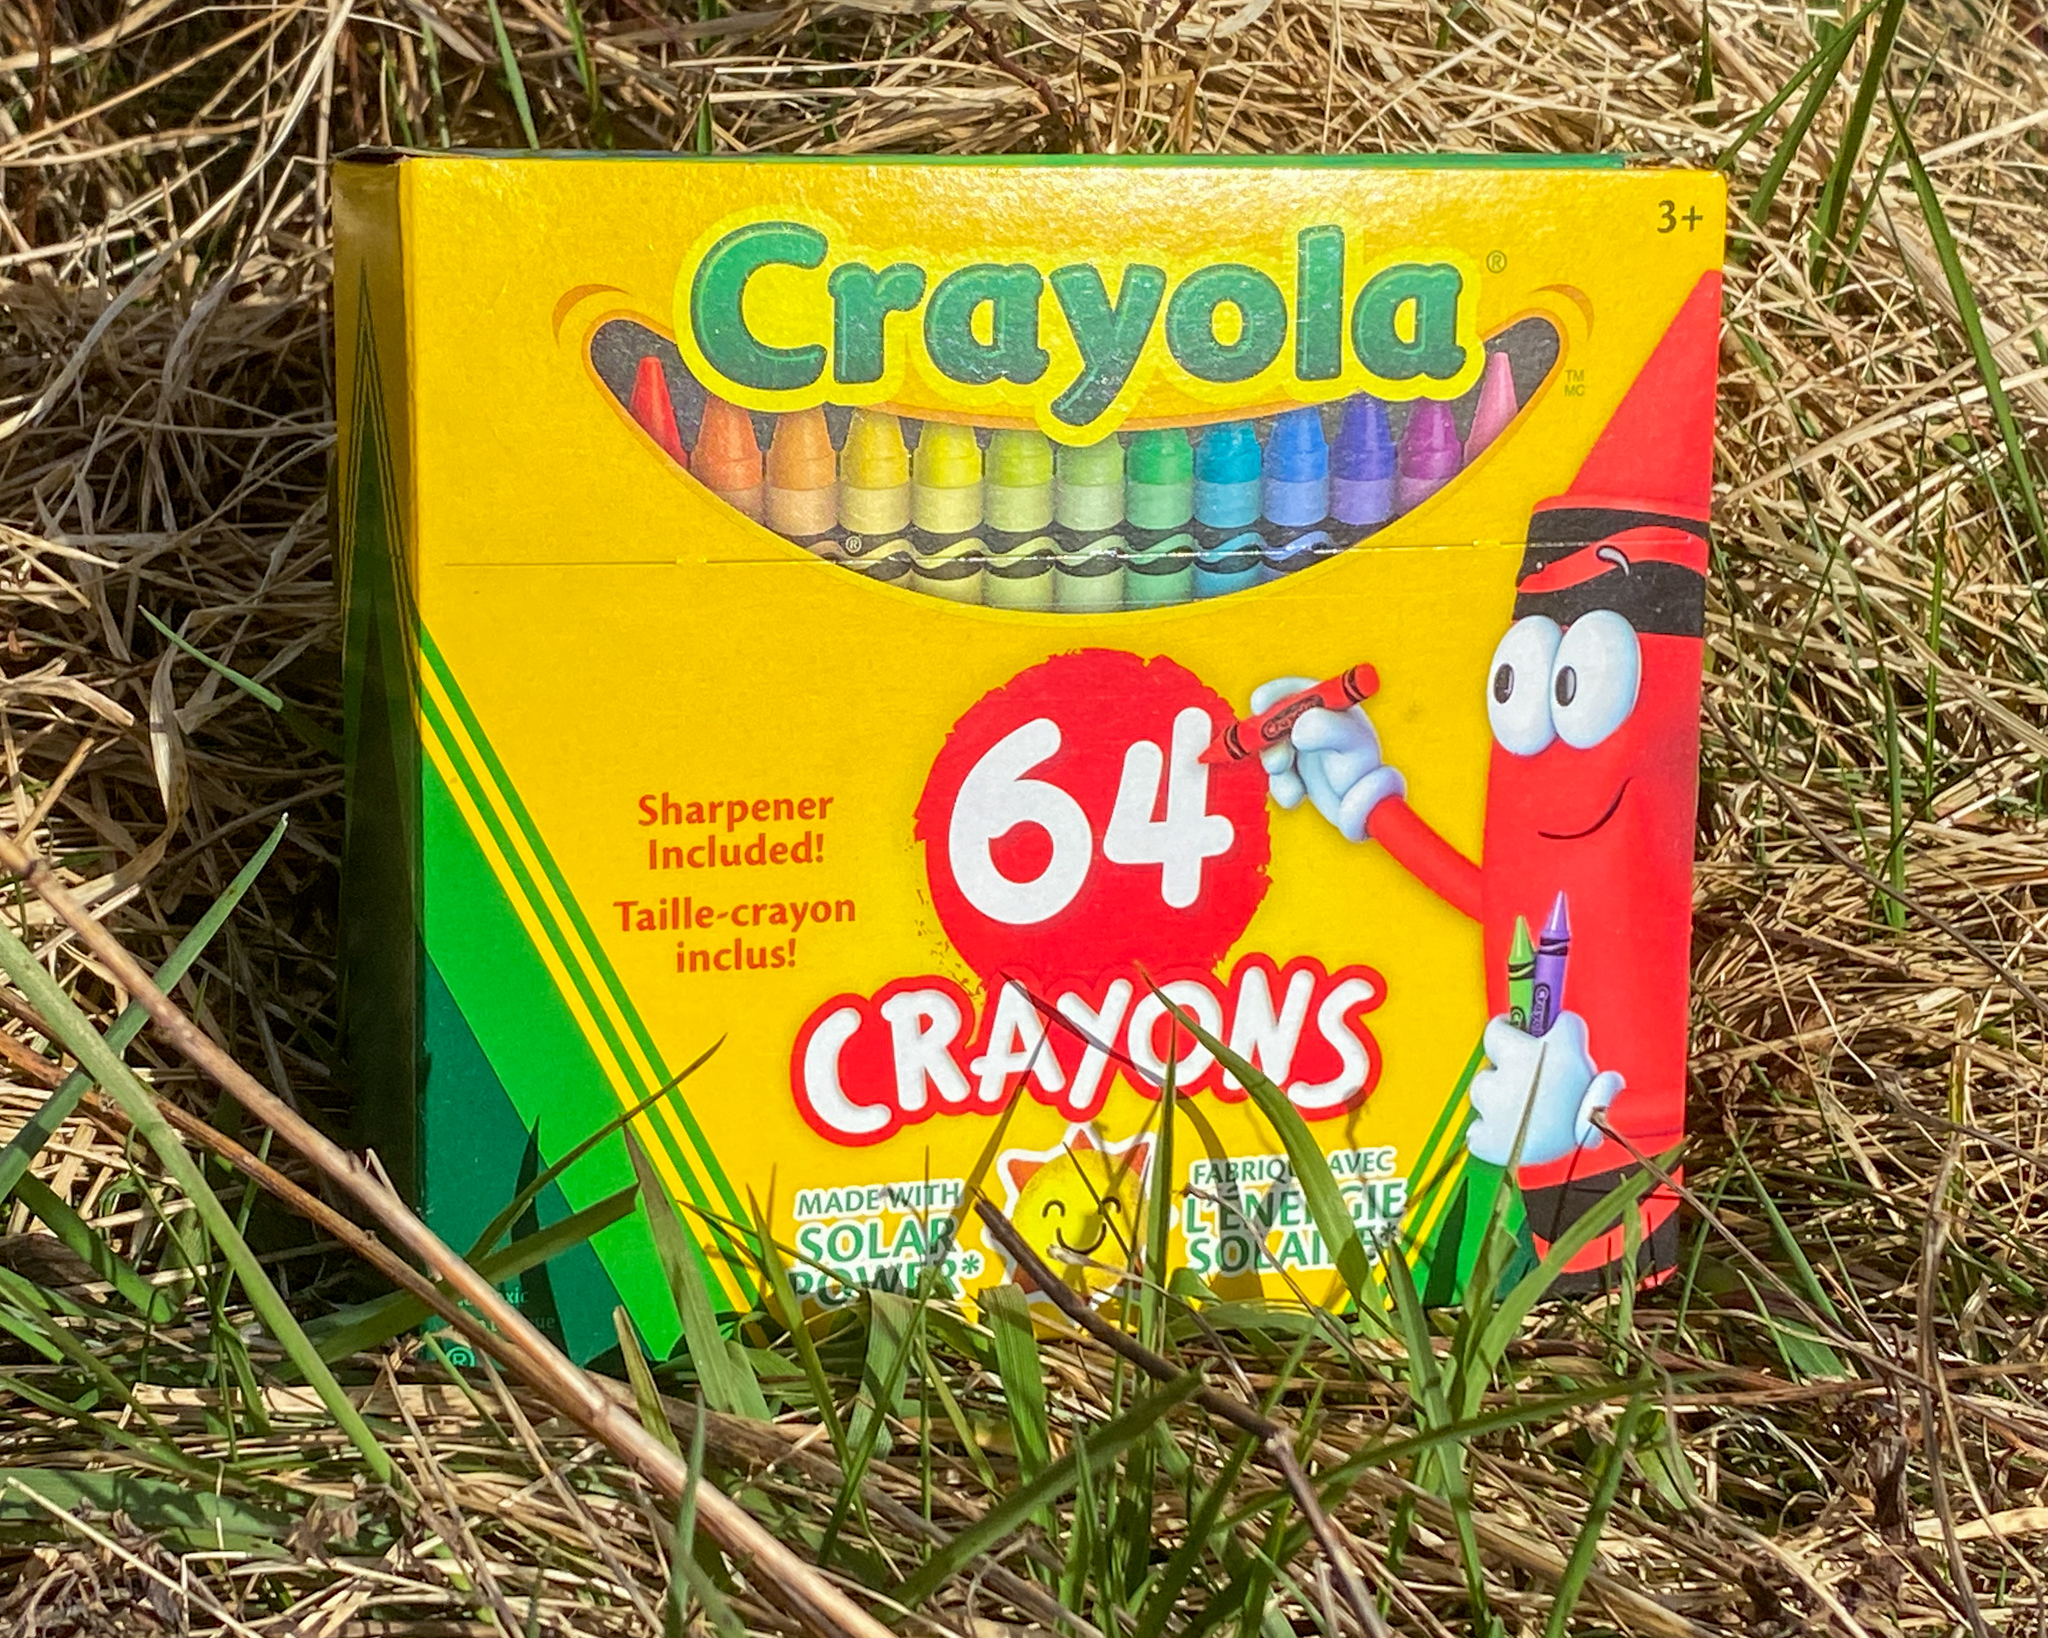 A box of 64 Crayola crayons has been a spring tradition for generations of kids.